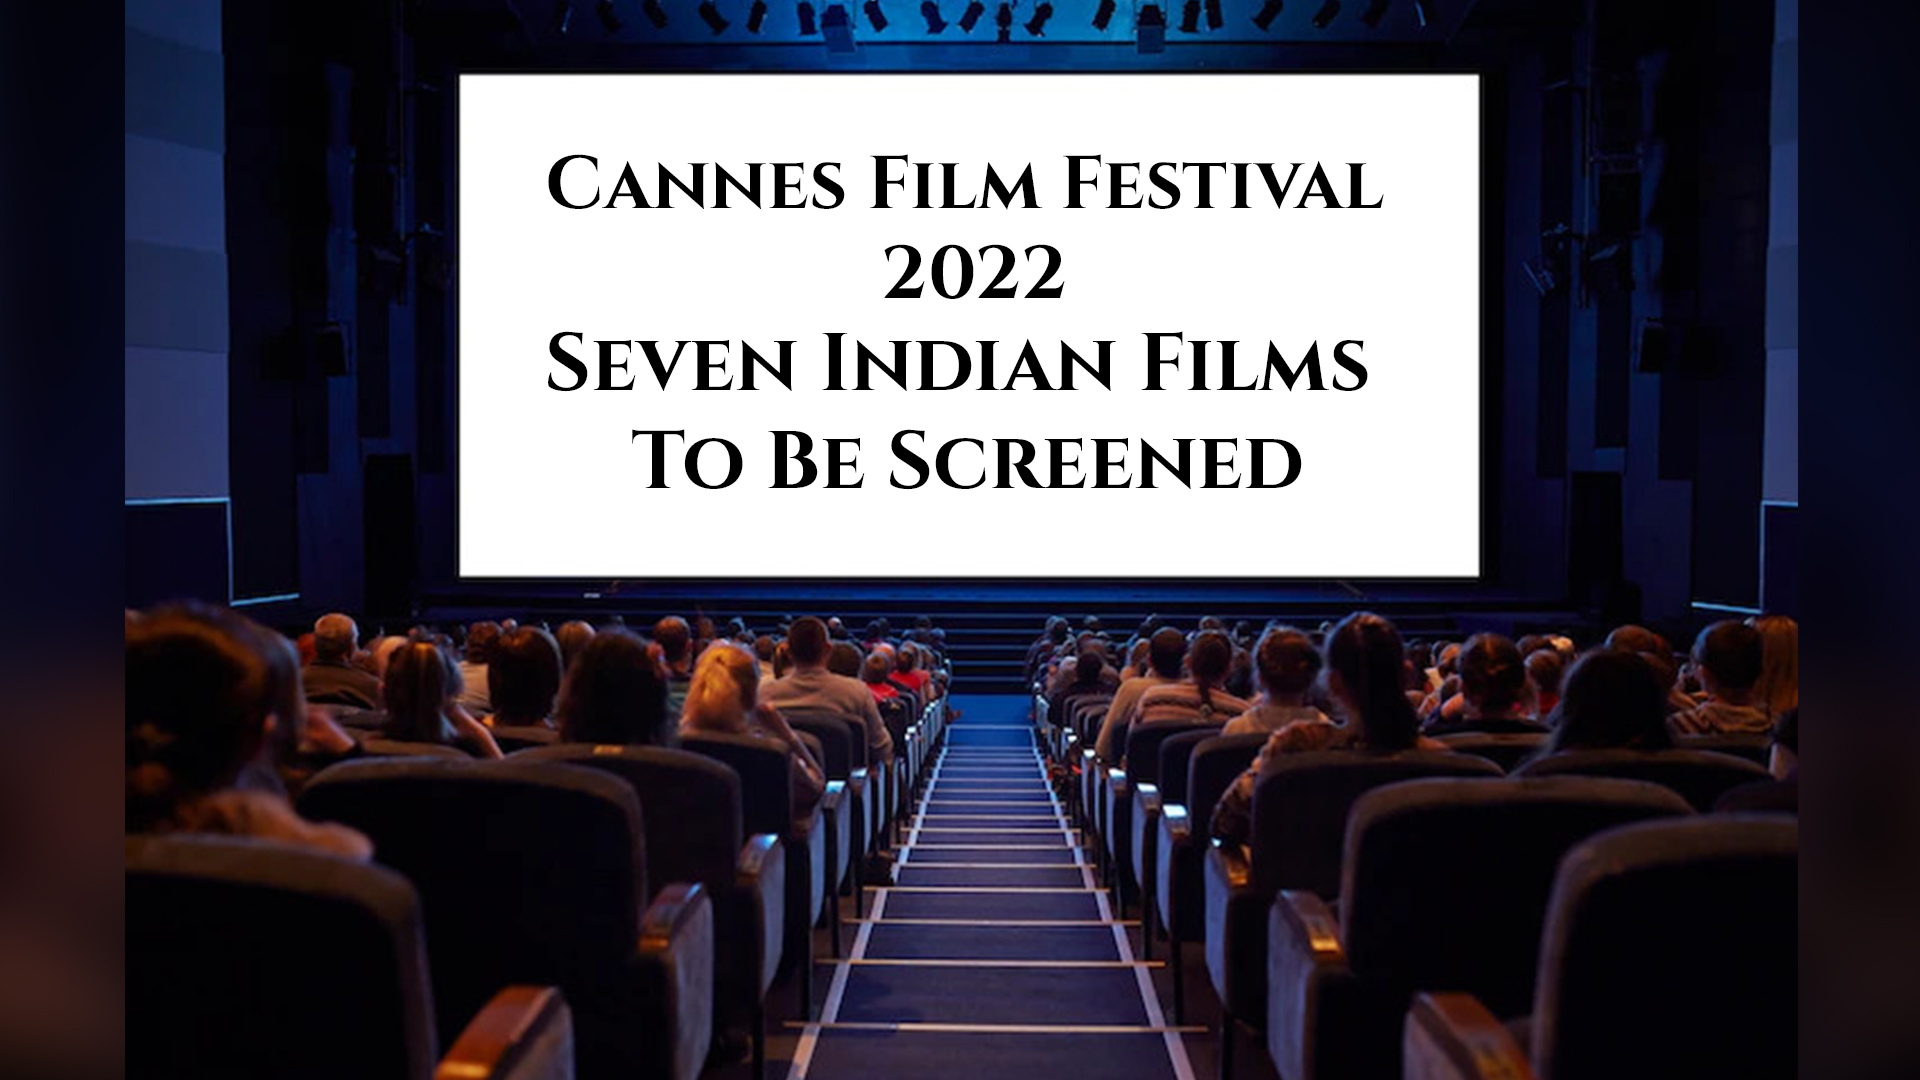 Cannes Film Festival 2022: Seven Indian Films To Be Screened